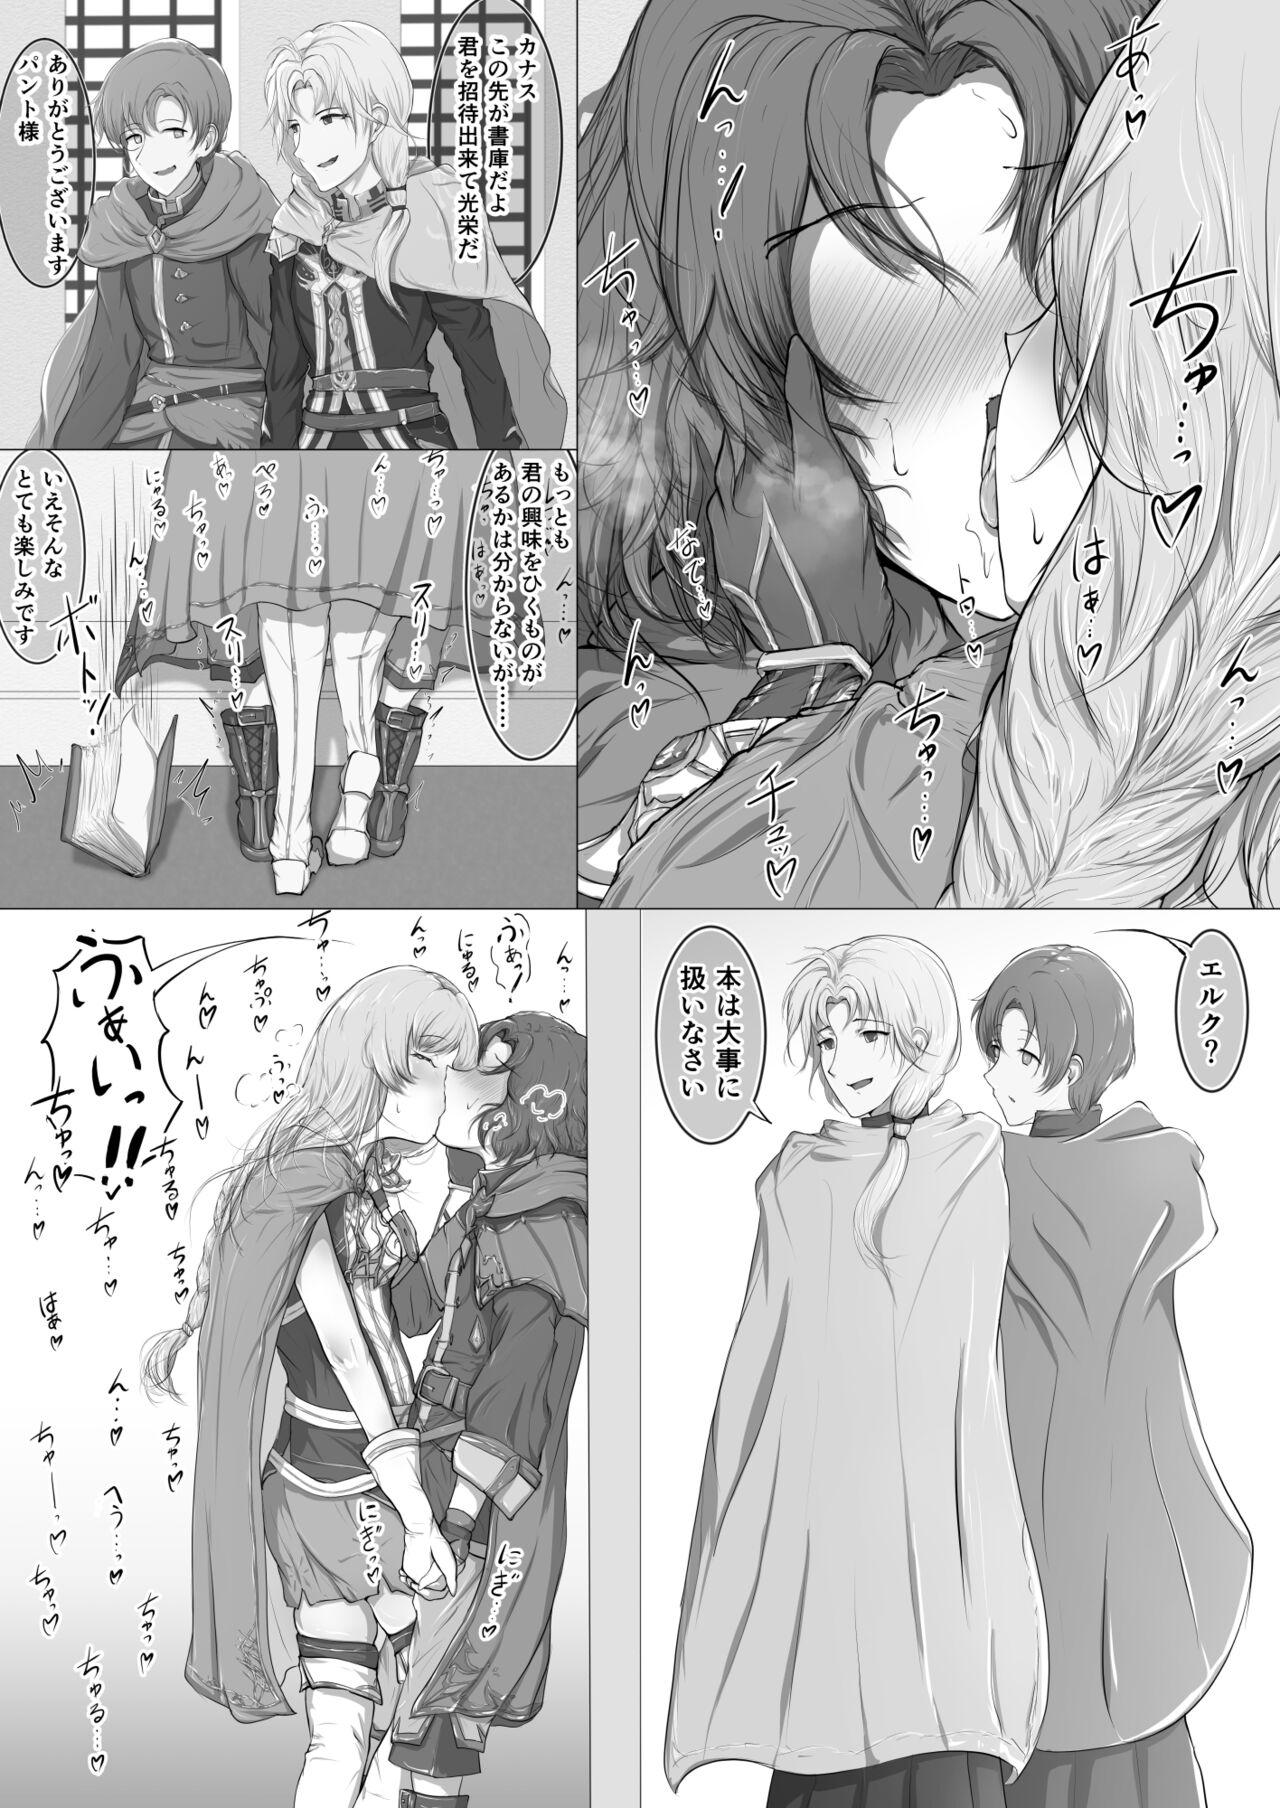 Whatsapp Erk and Louise Fire Emblem Blazing Blade NTR - Fire emblem Fire emblem heroes Fire emblem rekka no ken | fire emblem the blazing blade Cuckolding - Page 1